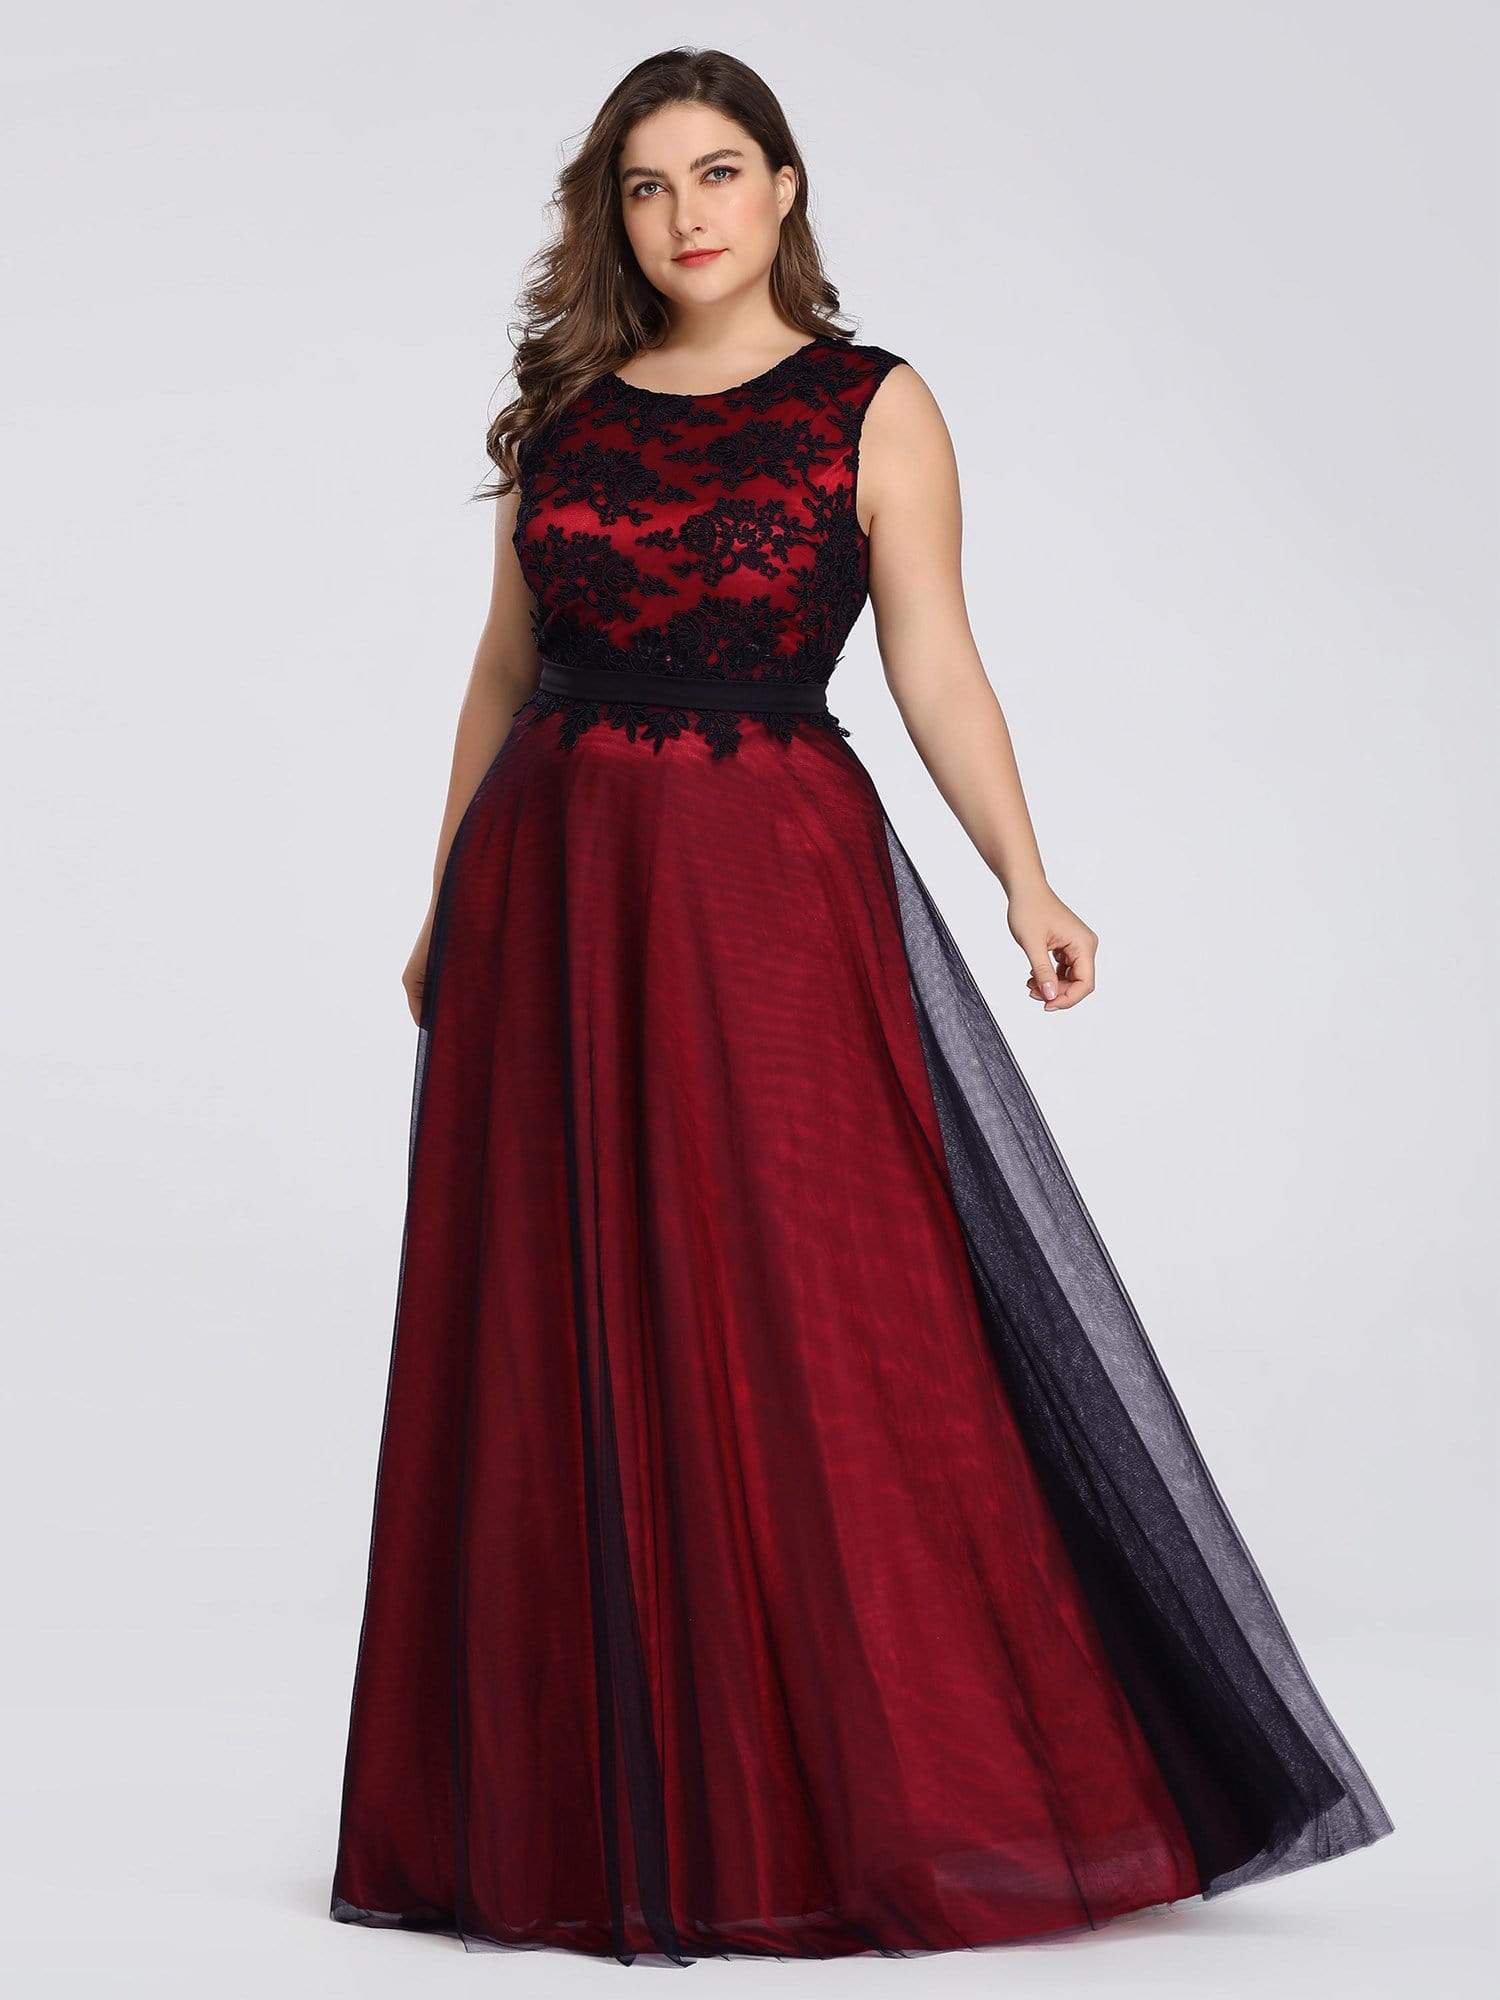 Floor Length Plus Size Lace Evening Dresses with Black Brocade